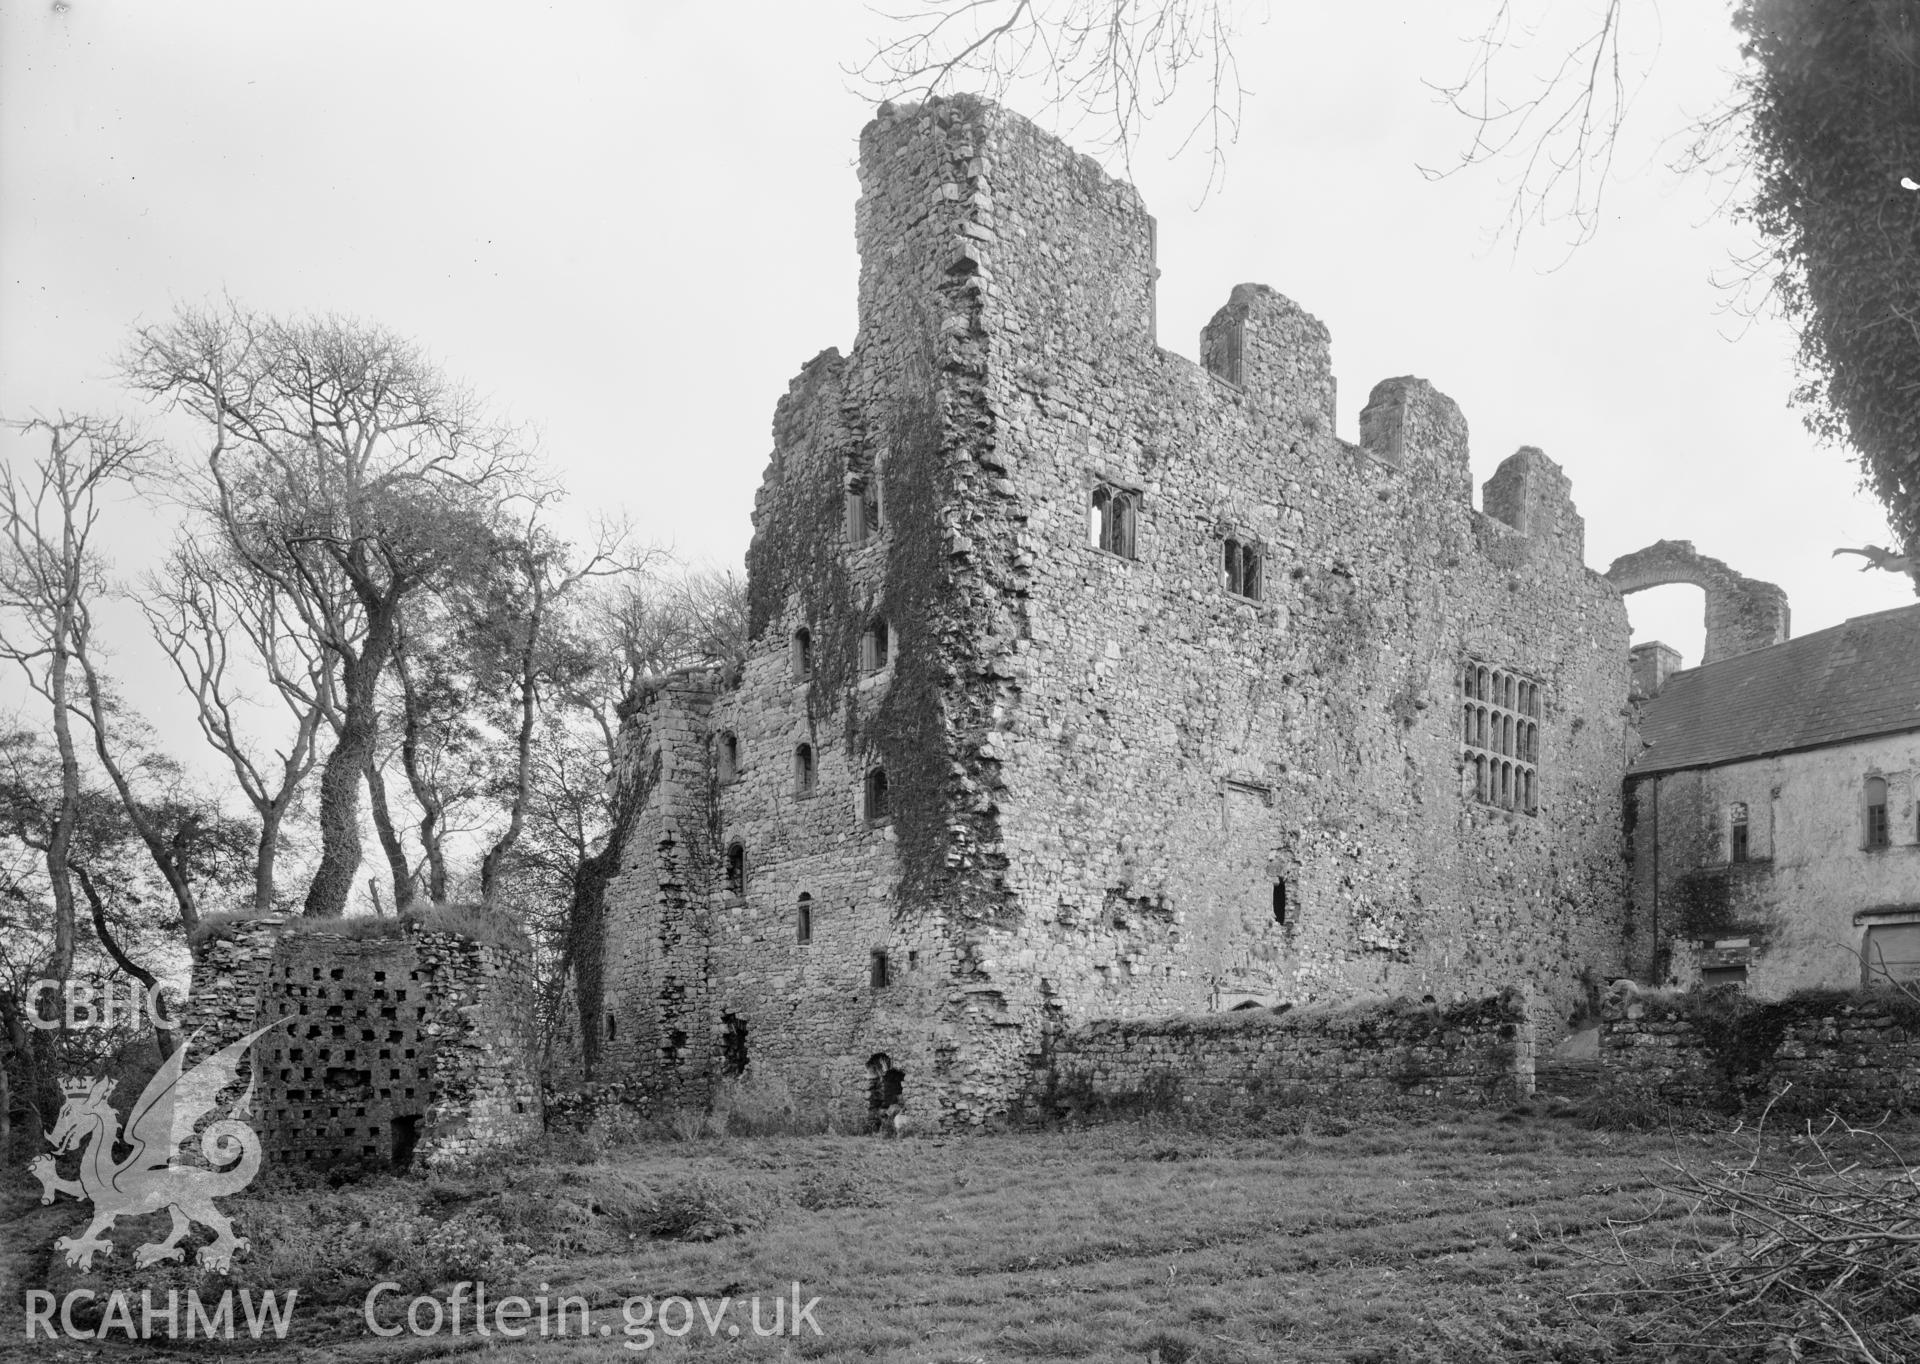 D.O.E photograph of Oxwich Castle - east range and dovecote from the north west.